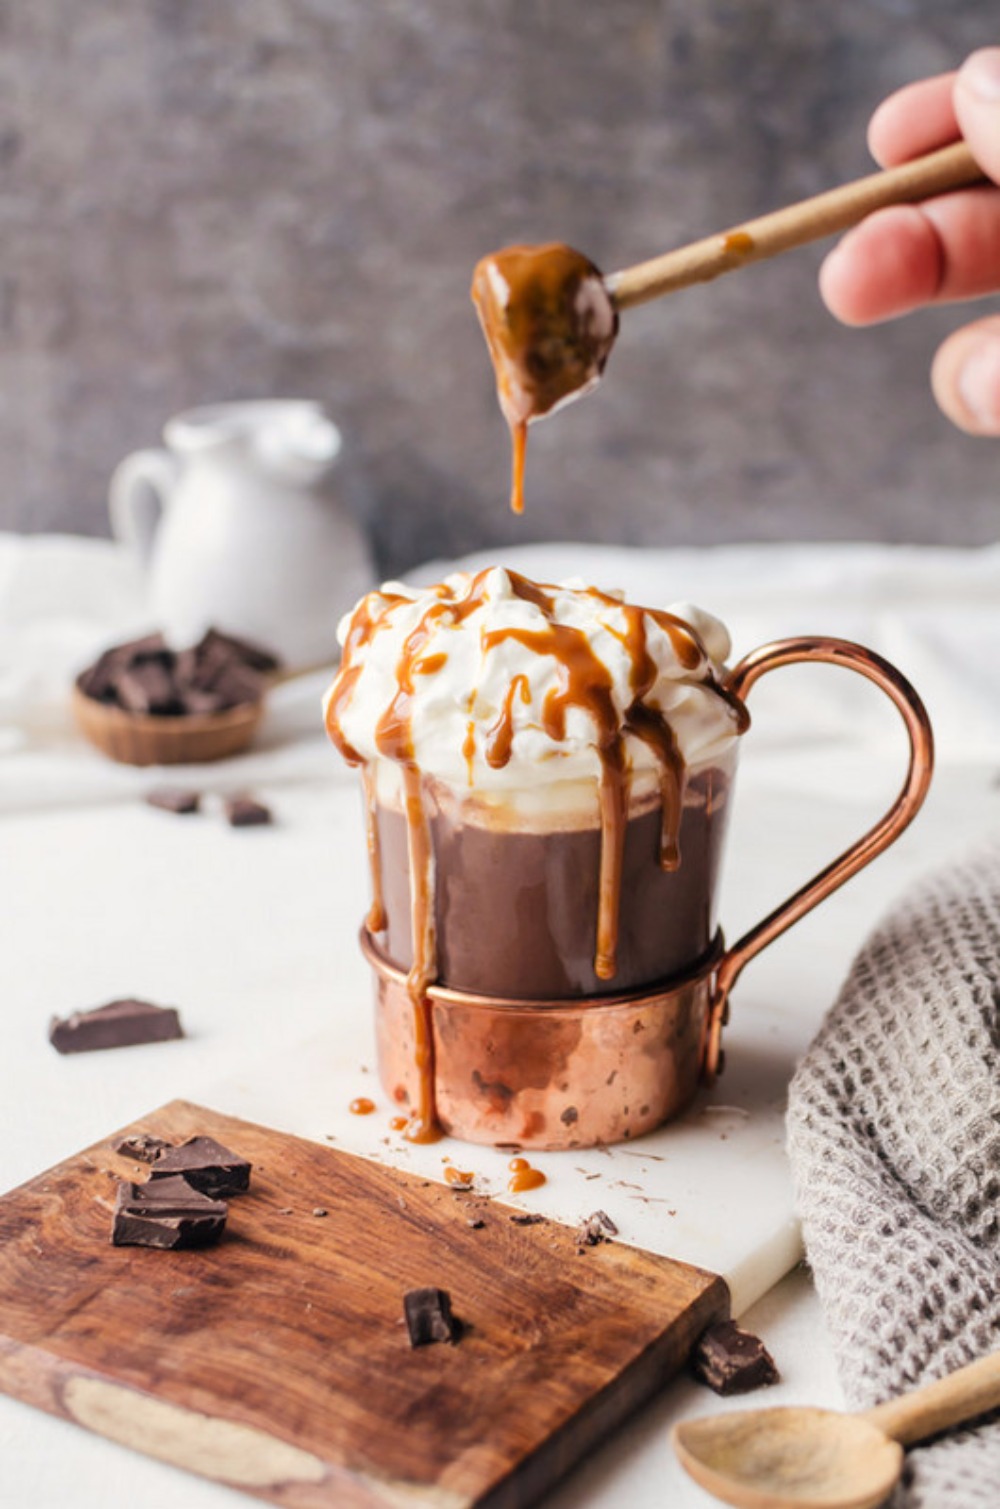 the-spiked-hot-chocolate-recipes-we-re-craving-thi